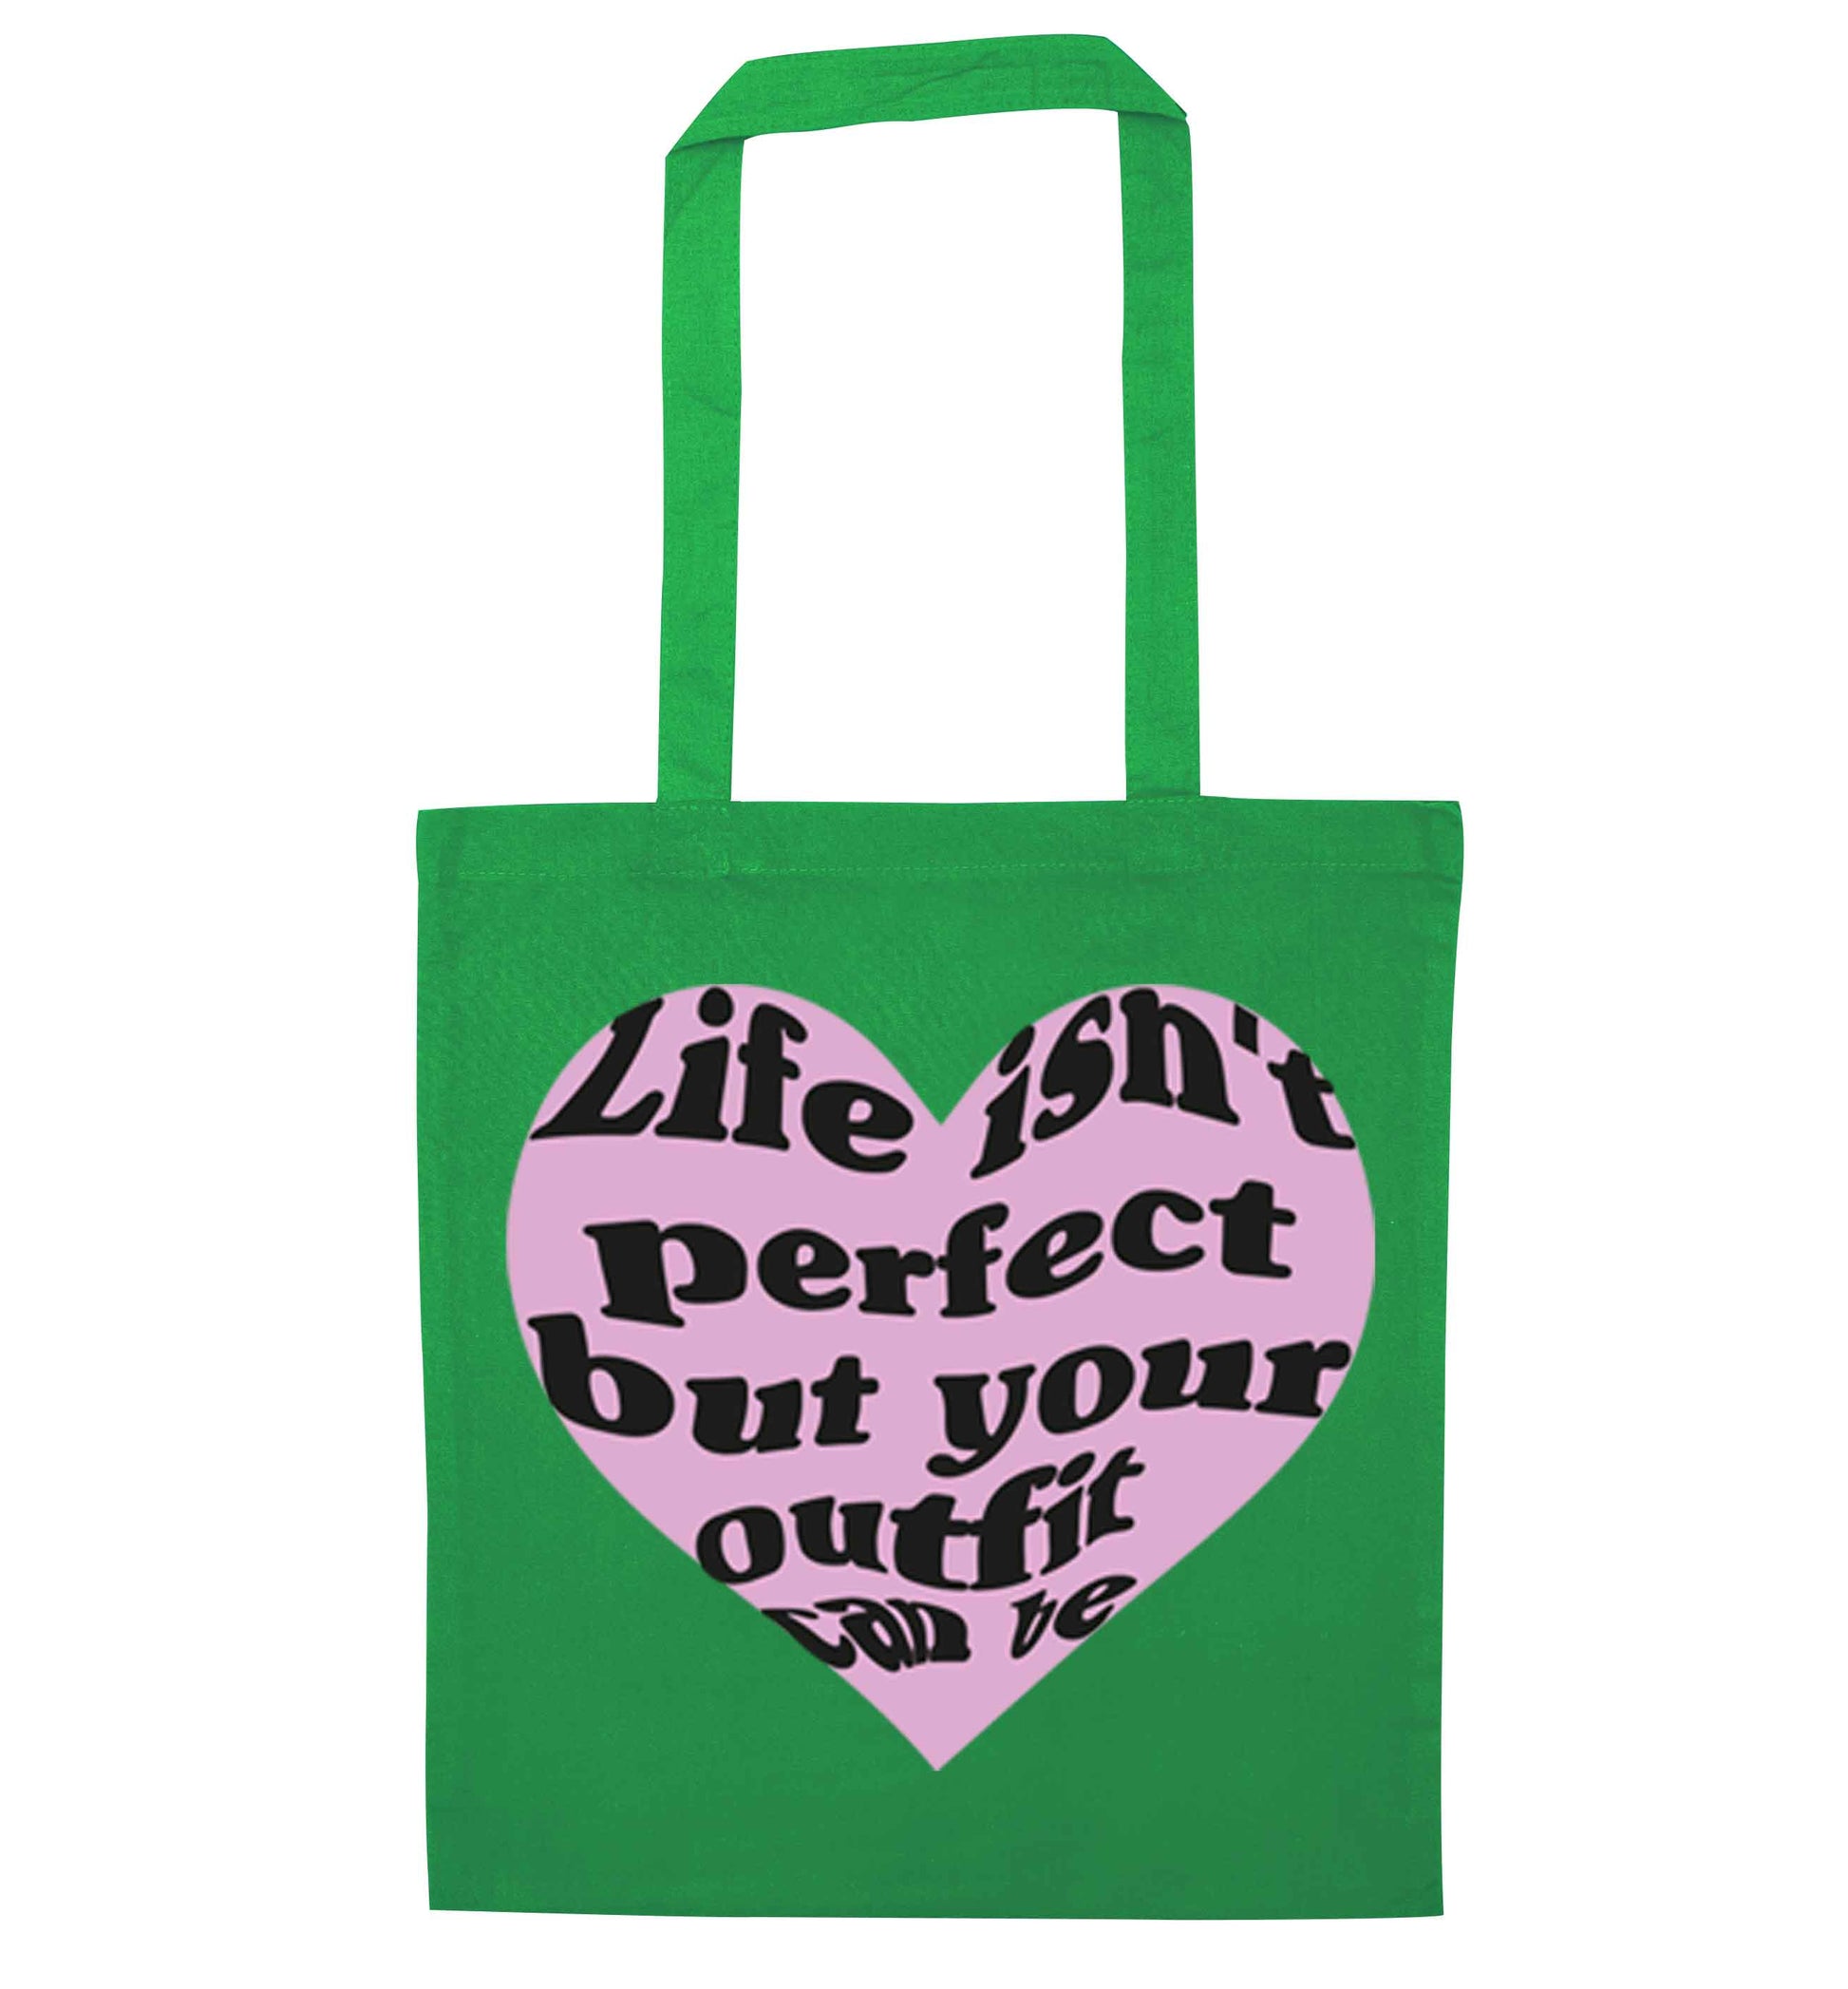 Life isn't perfect but your outfit can be green tote bag